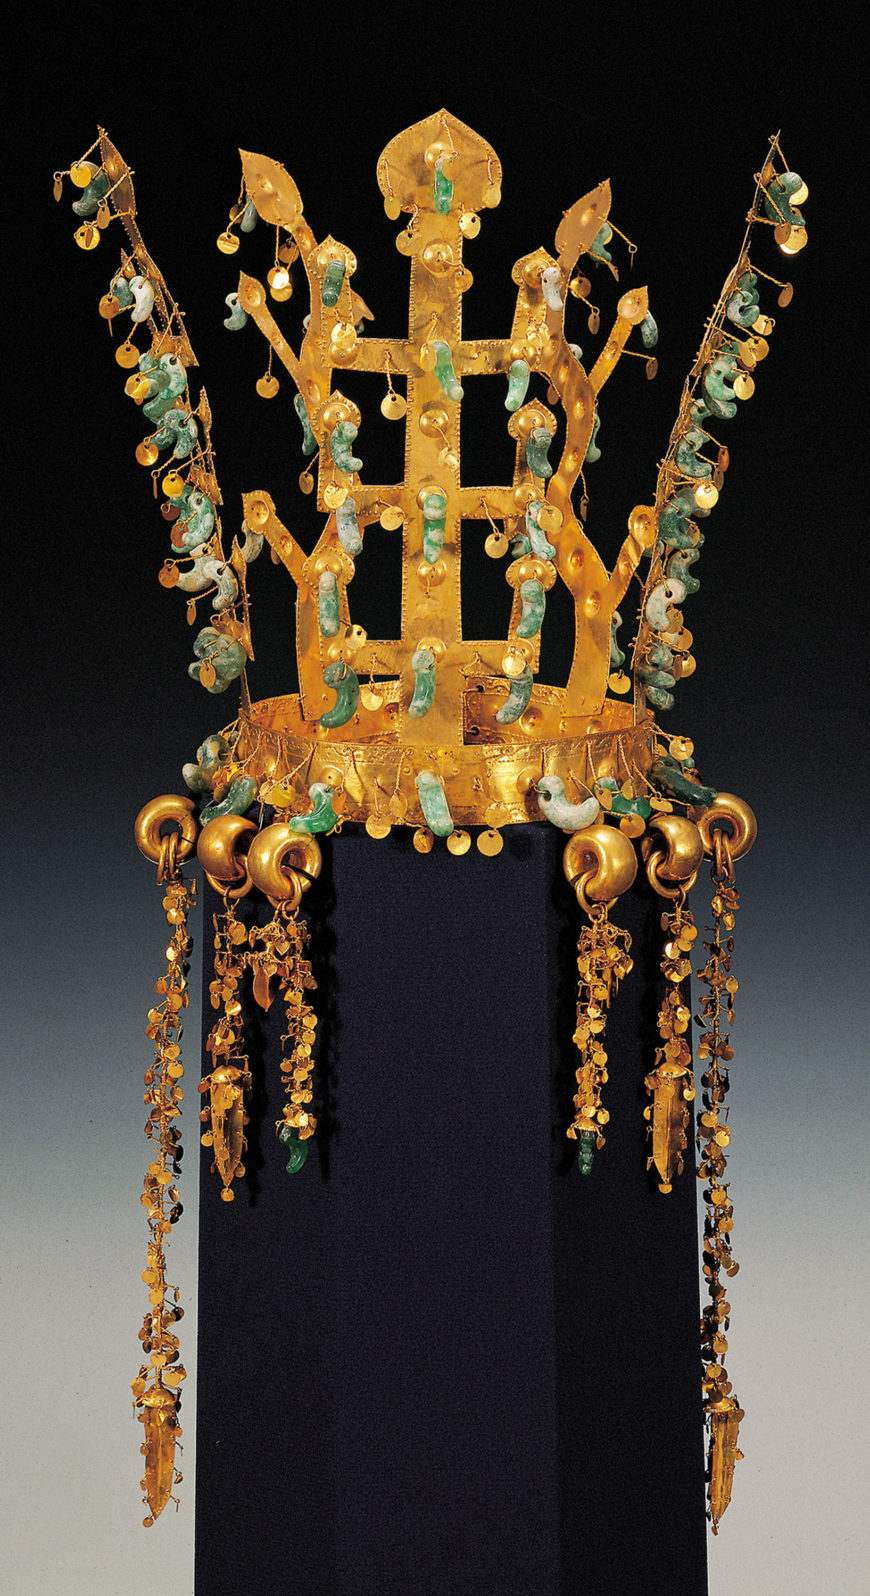 Queen's gold crown from the north mound of Hwangnamdaechong Tomb, Gyeongju, Silla Kingdom, 27.3 cm high, National Treasure 191 (National Museum of Korea; photo: Cultural Heritage Administration of the Republic of Korea)